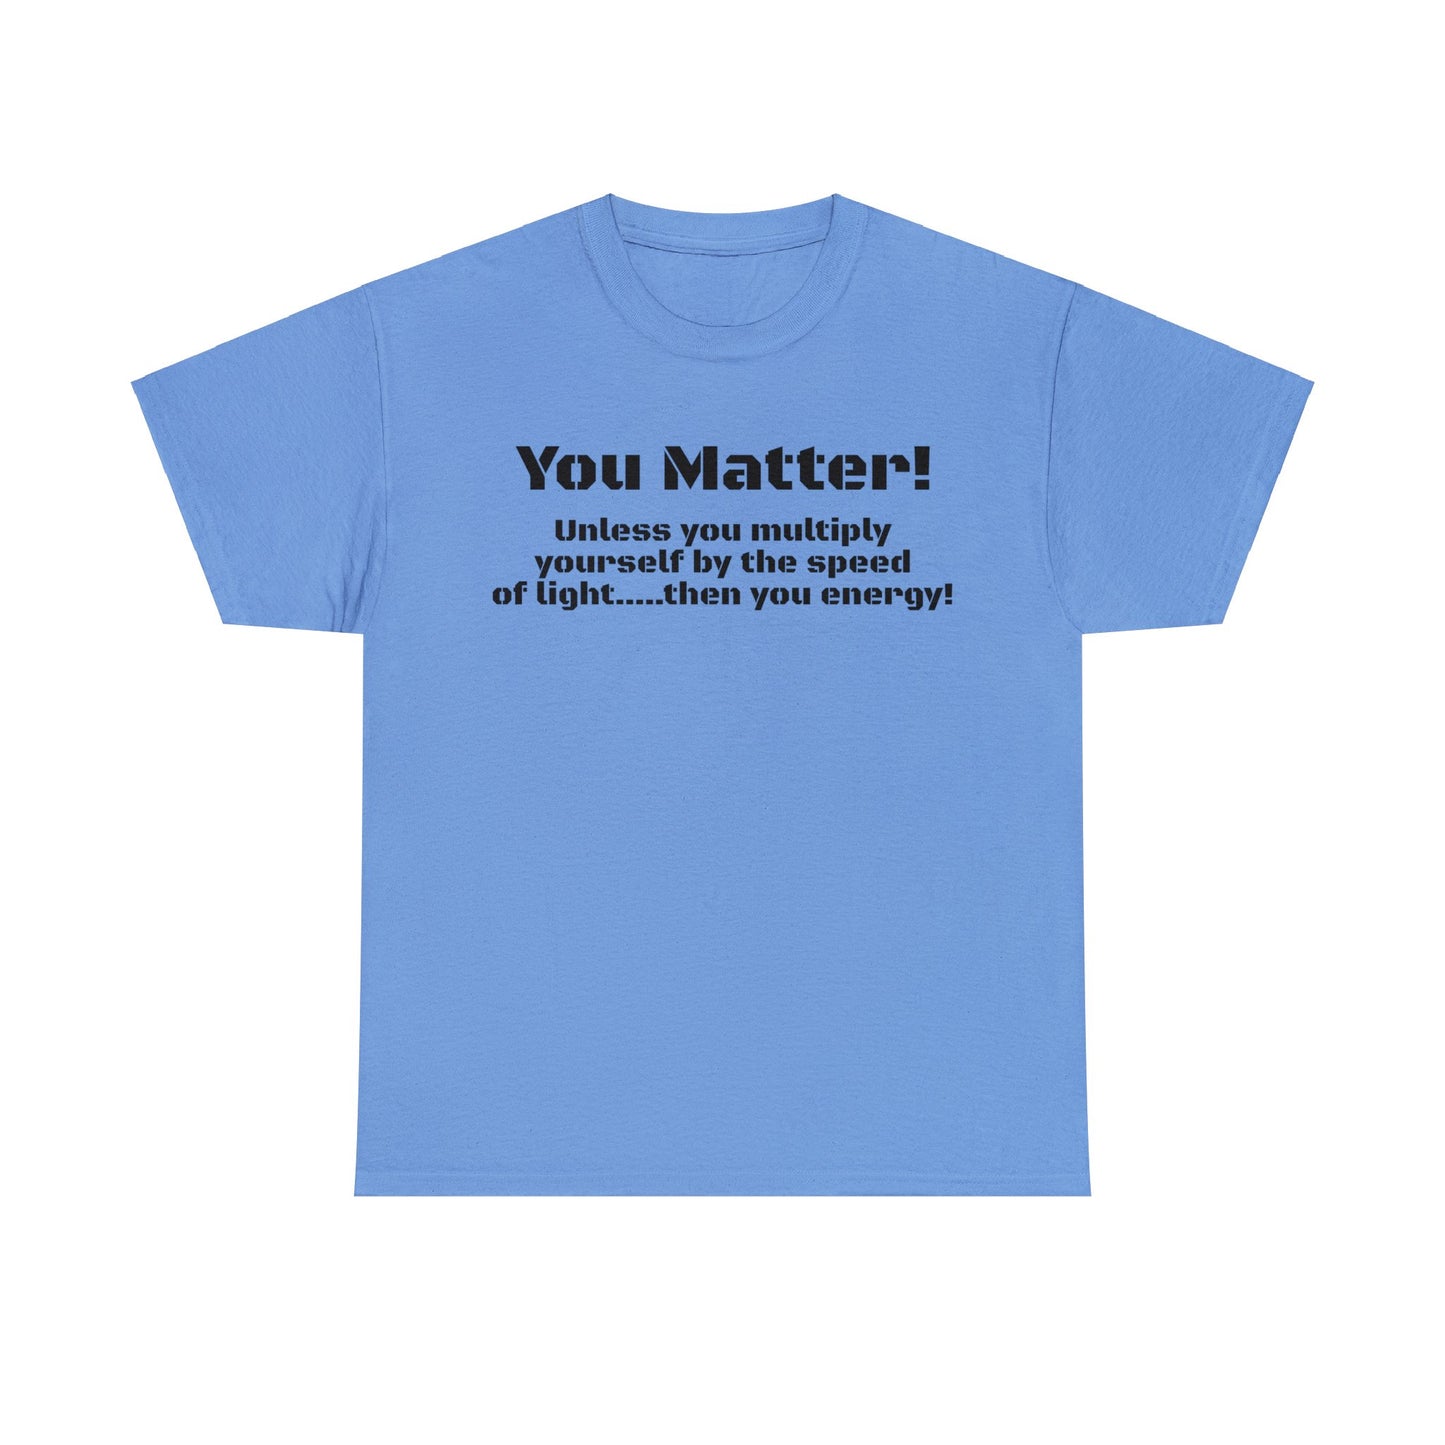 You Matter! Unless You Multiply Yourself By the Speed of Light! Philosphical T-Shirt